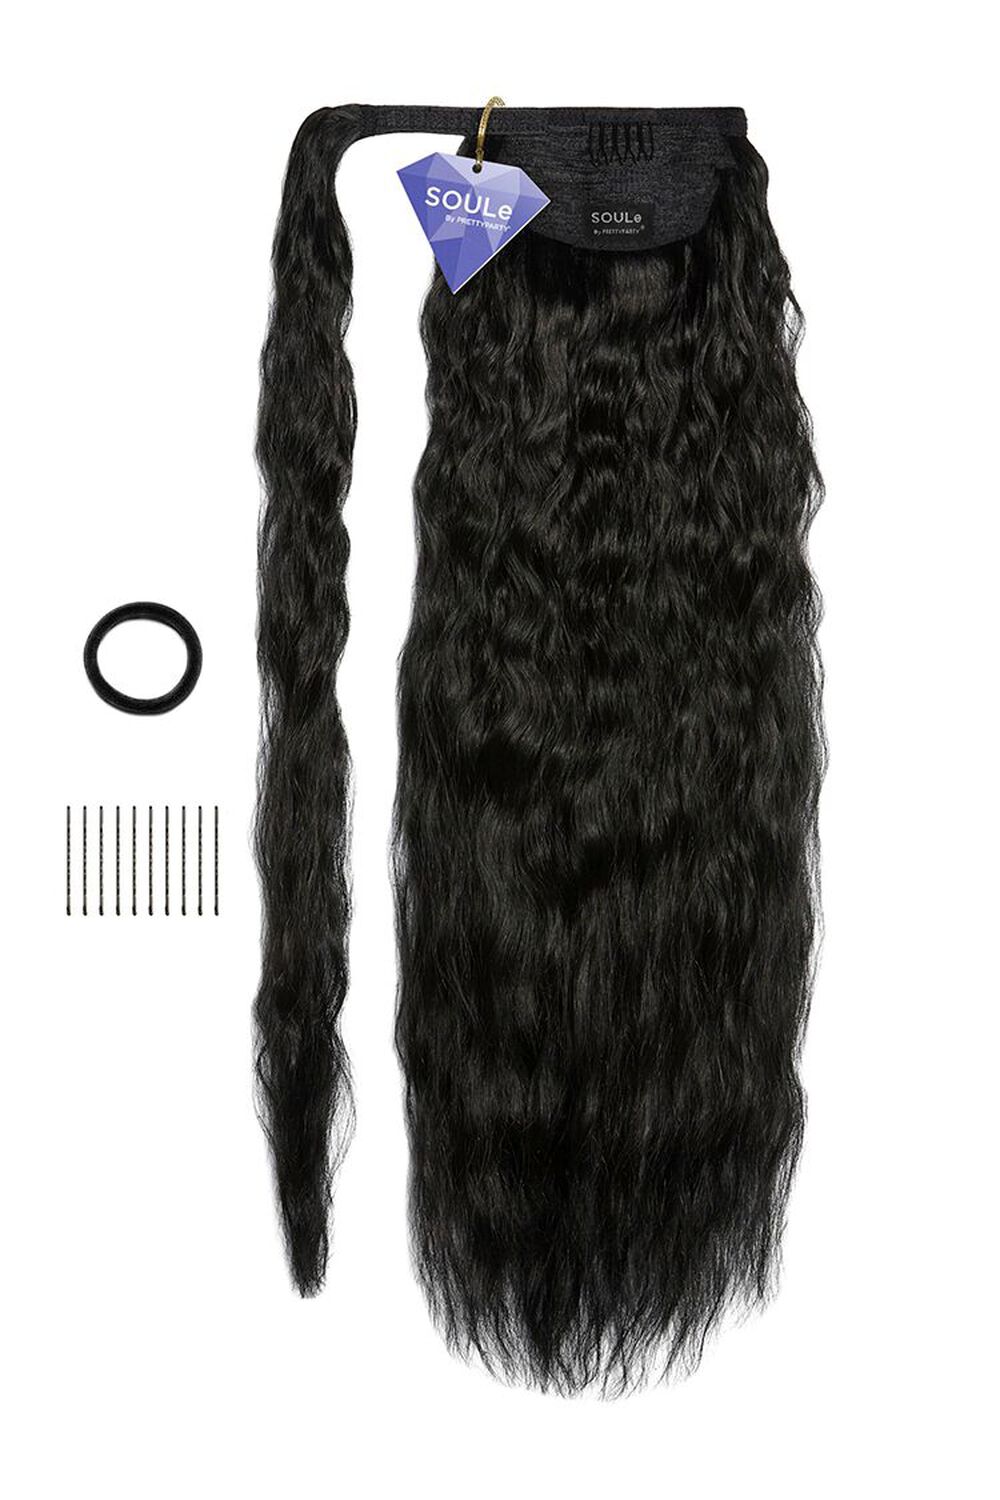 BLACK PRETTYPARTY The Caprii Hook-and-Loop Wrap-Around Ponytail, image 3